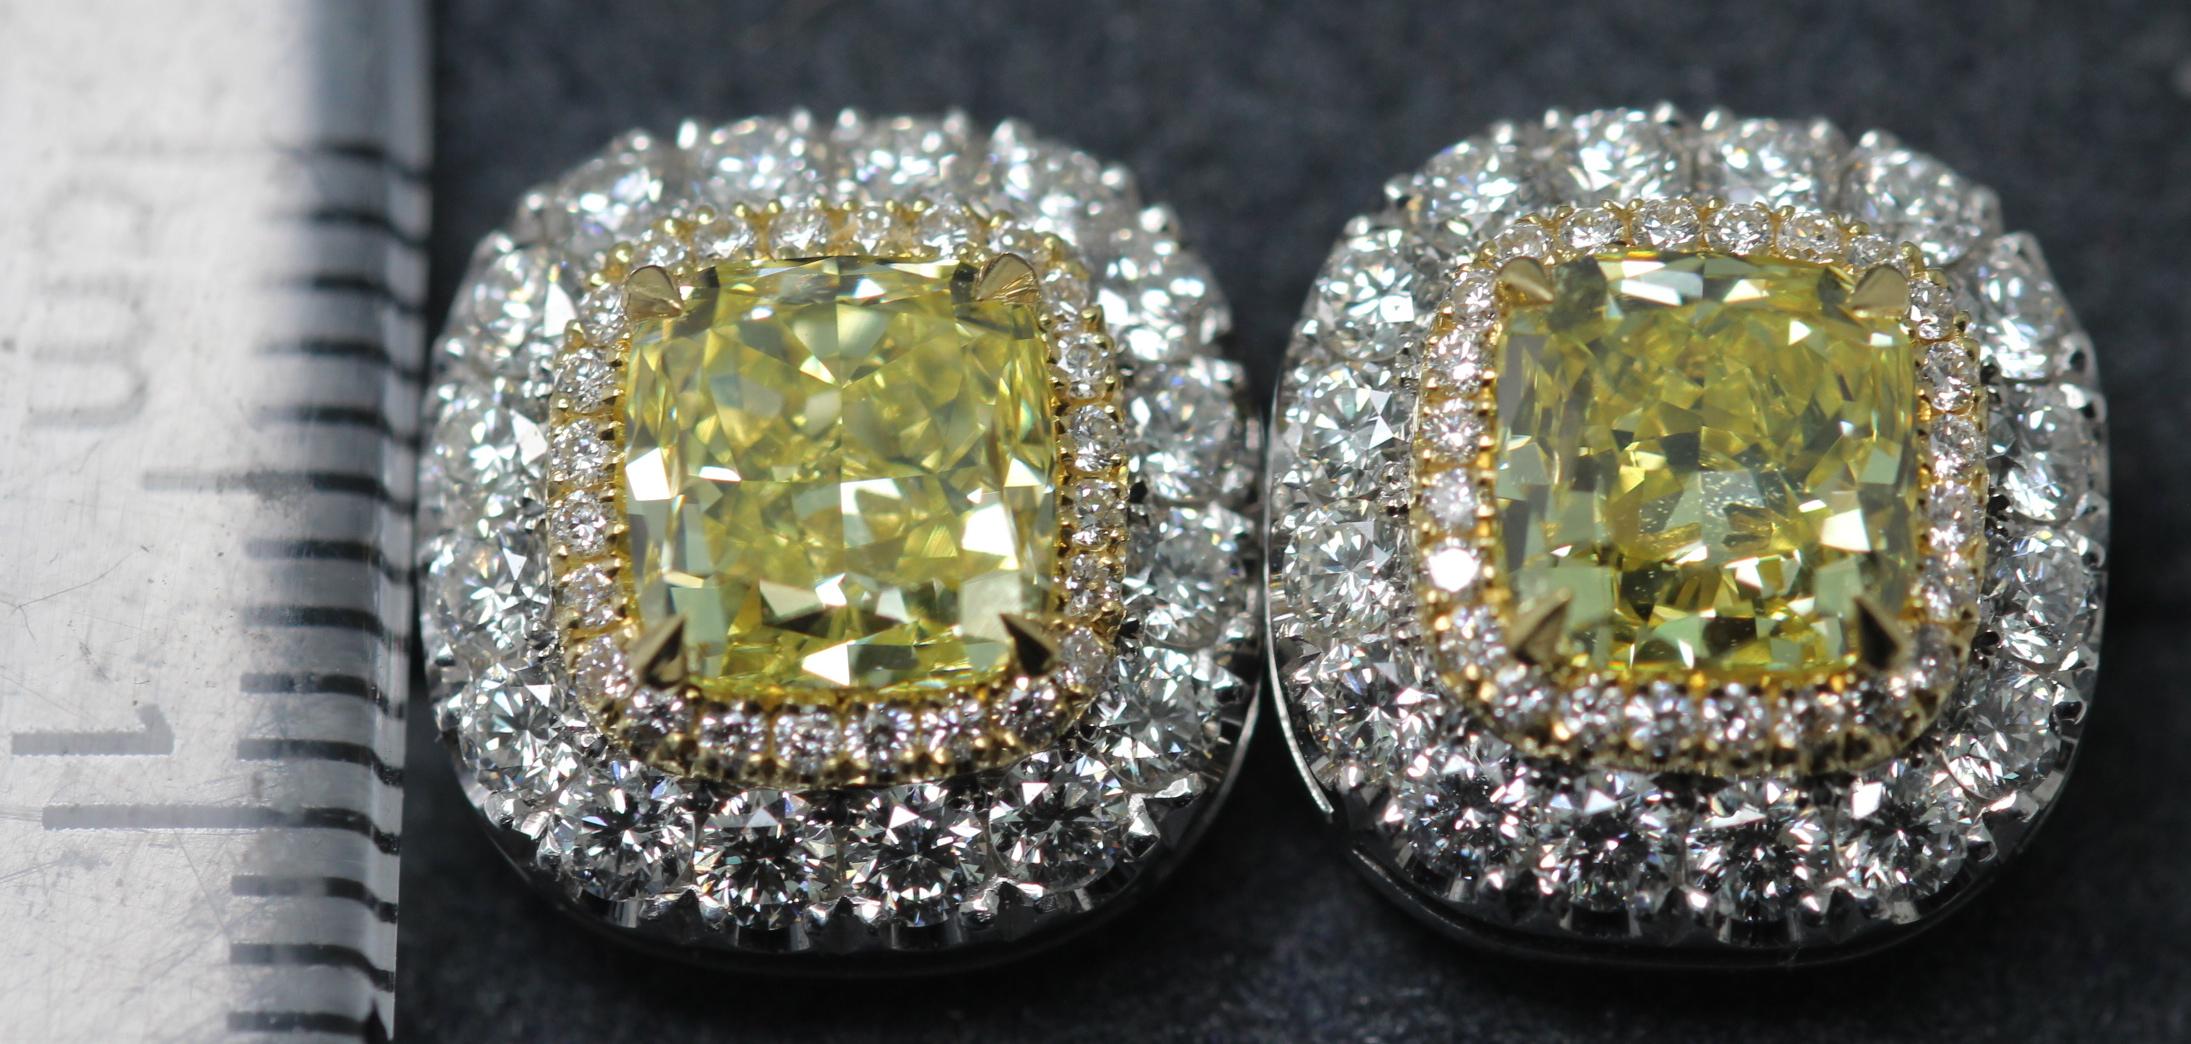 Cushion Cut GIA Certified Fancy Intense Yellow Diamond Earrings Mounted in Platinum and Gold